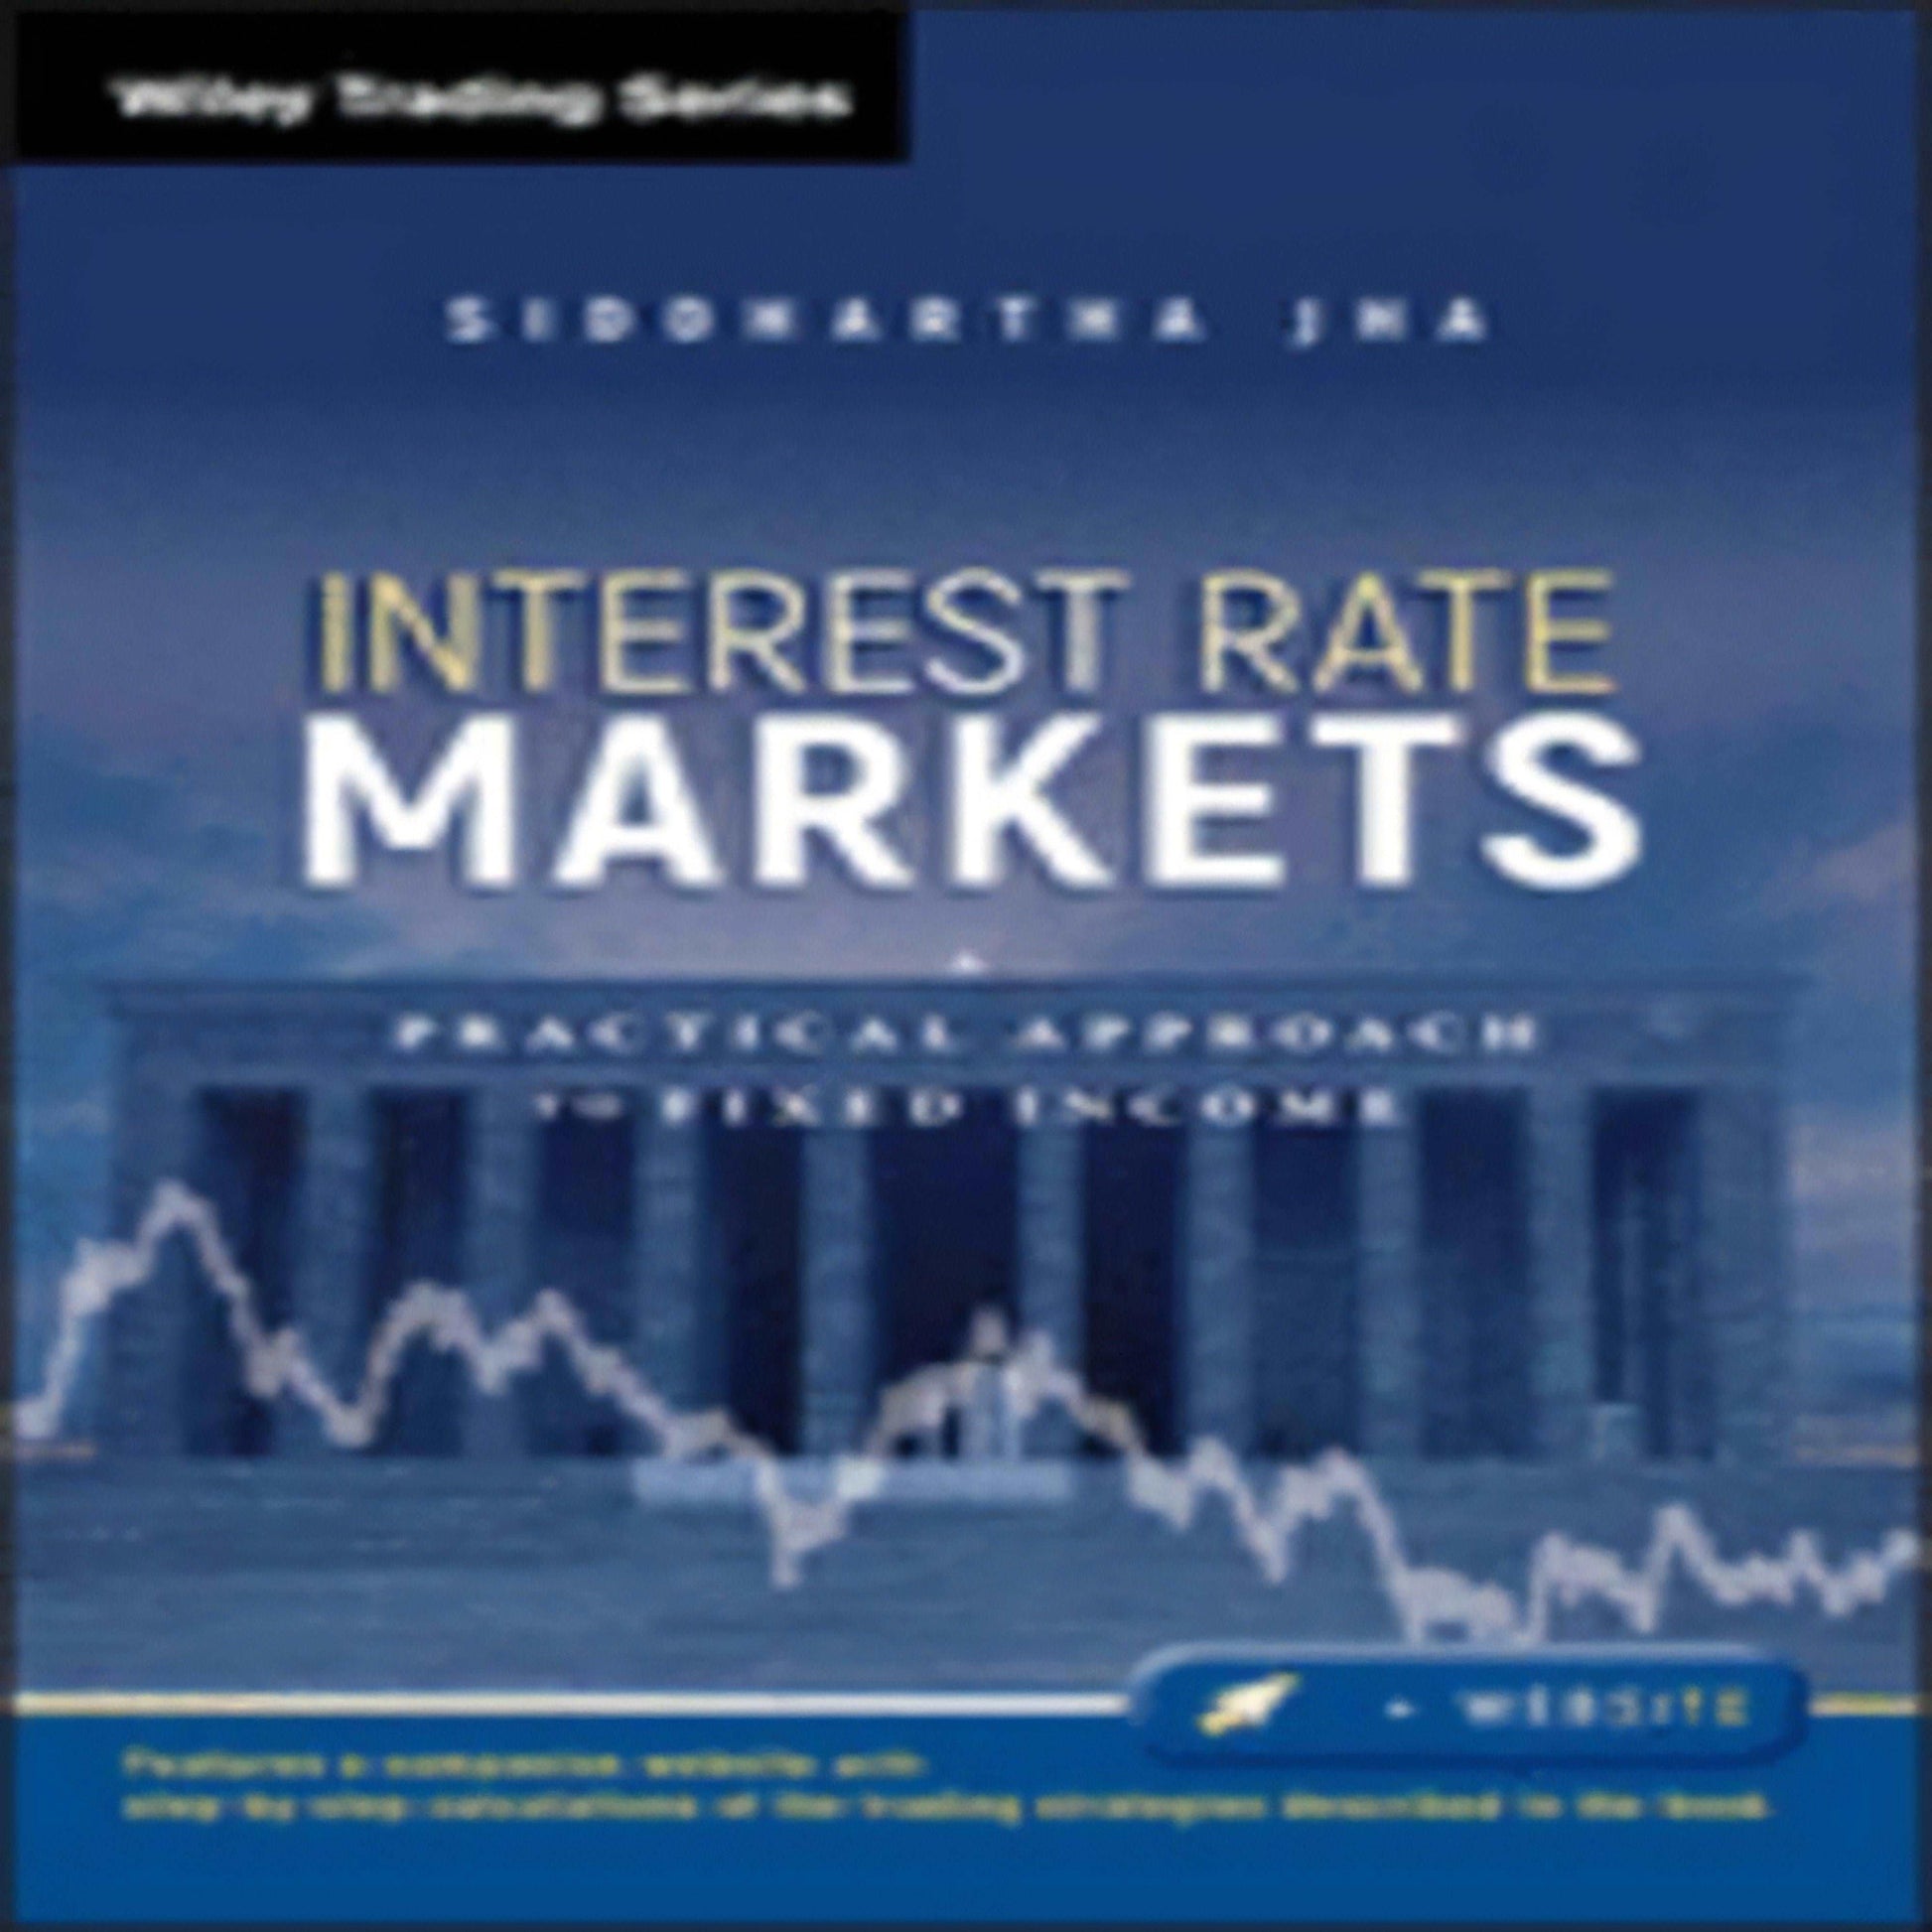 TEXTBOOK Interest Rate Markets: A Practical Approach to Fixed Income (Wiley Trading #501) (1ST ed.)72-121222-0470932201DPGBOOKSTORE.COM. Today's Bestsellers.